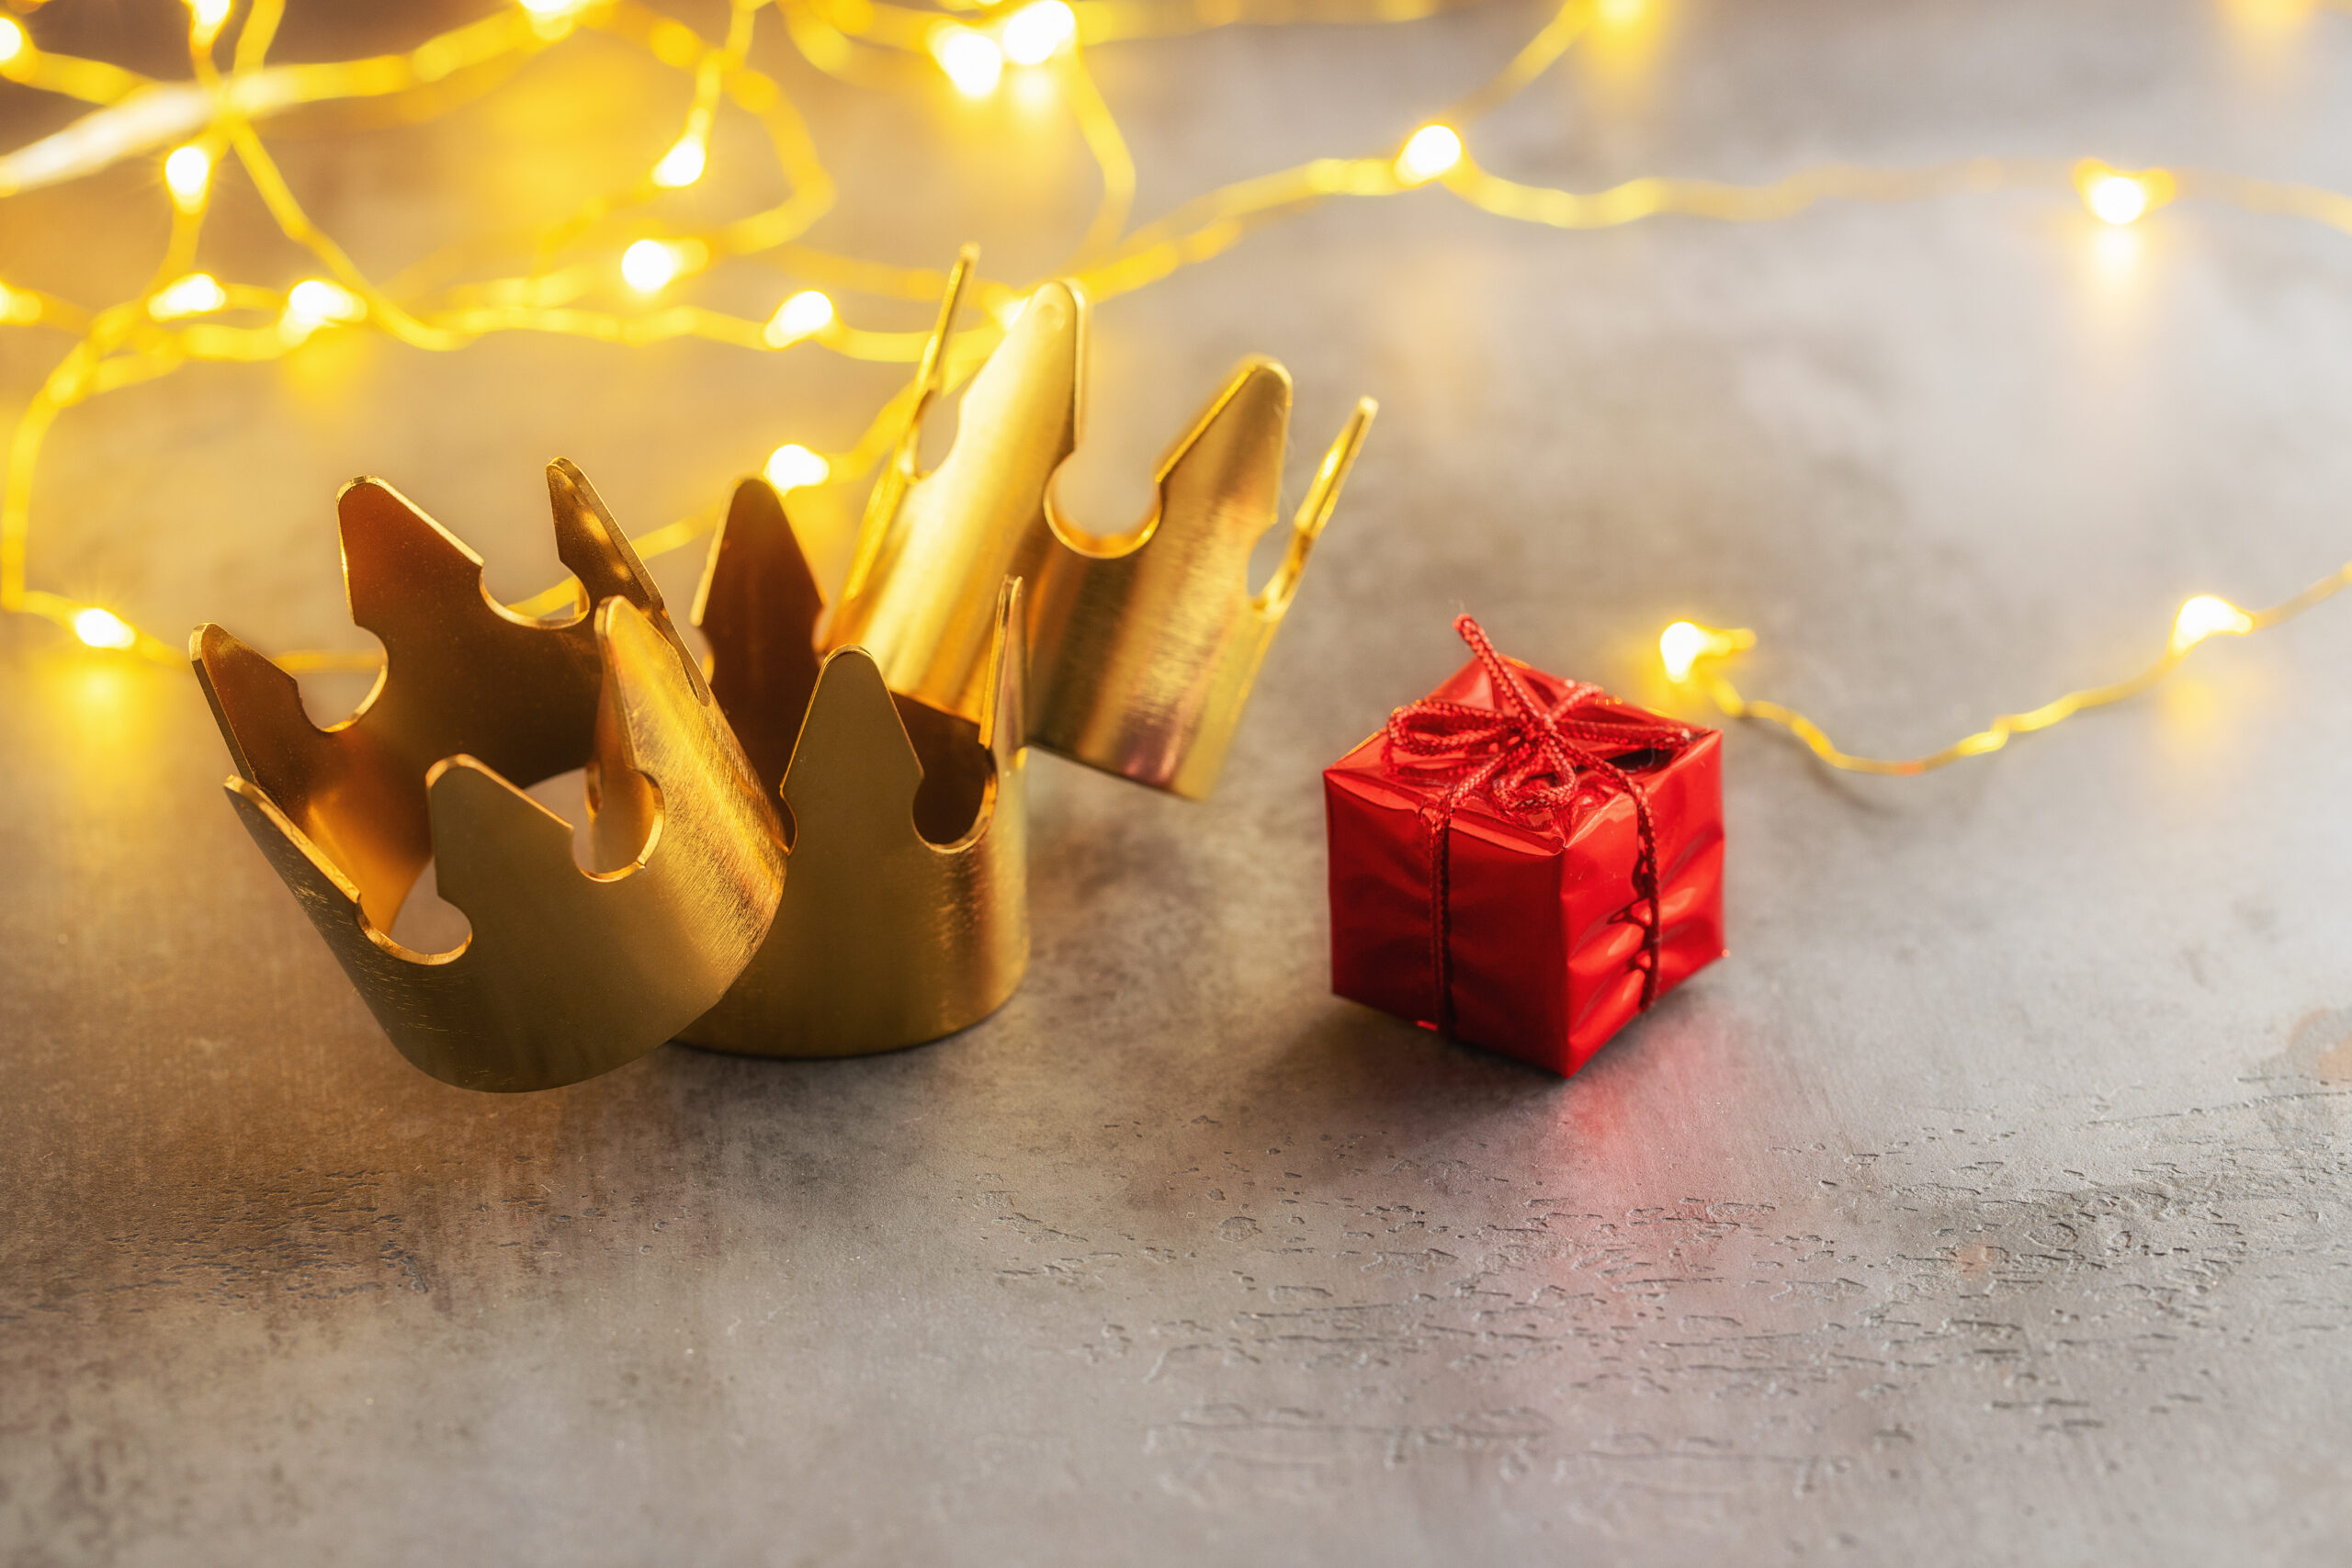 Three,Gold,Crowns,And,Red,Gift,Box,For,Concept,Of